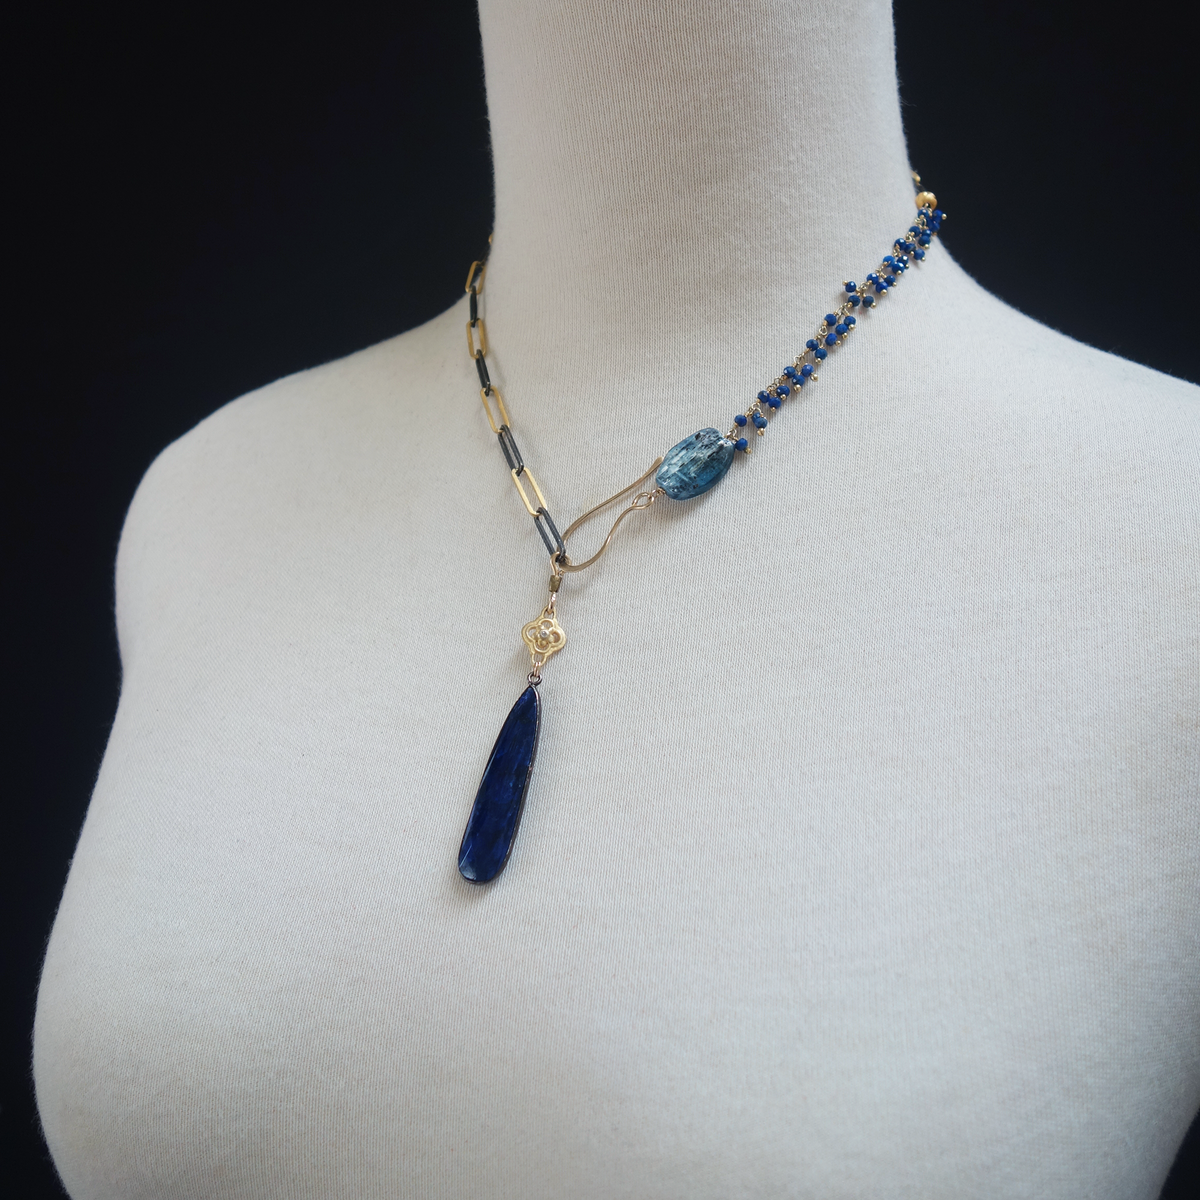 Symphony in blue: kyanite and sapphire adjustable necklace